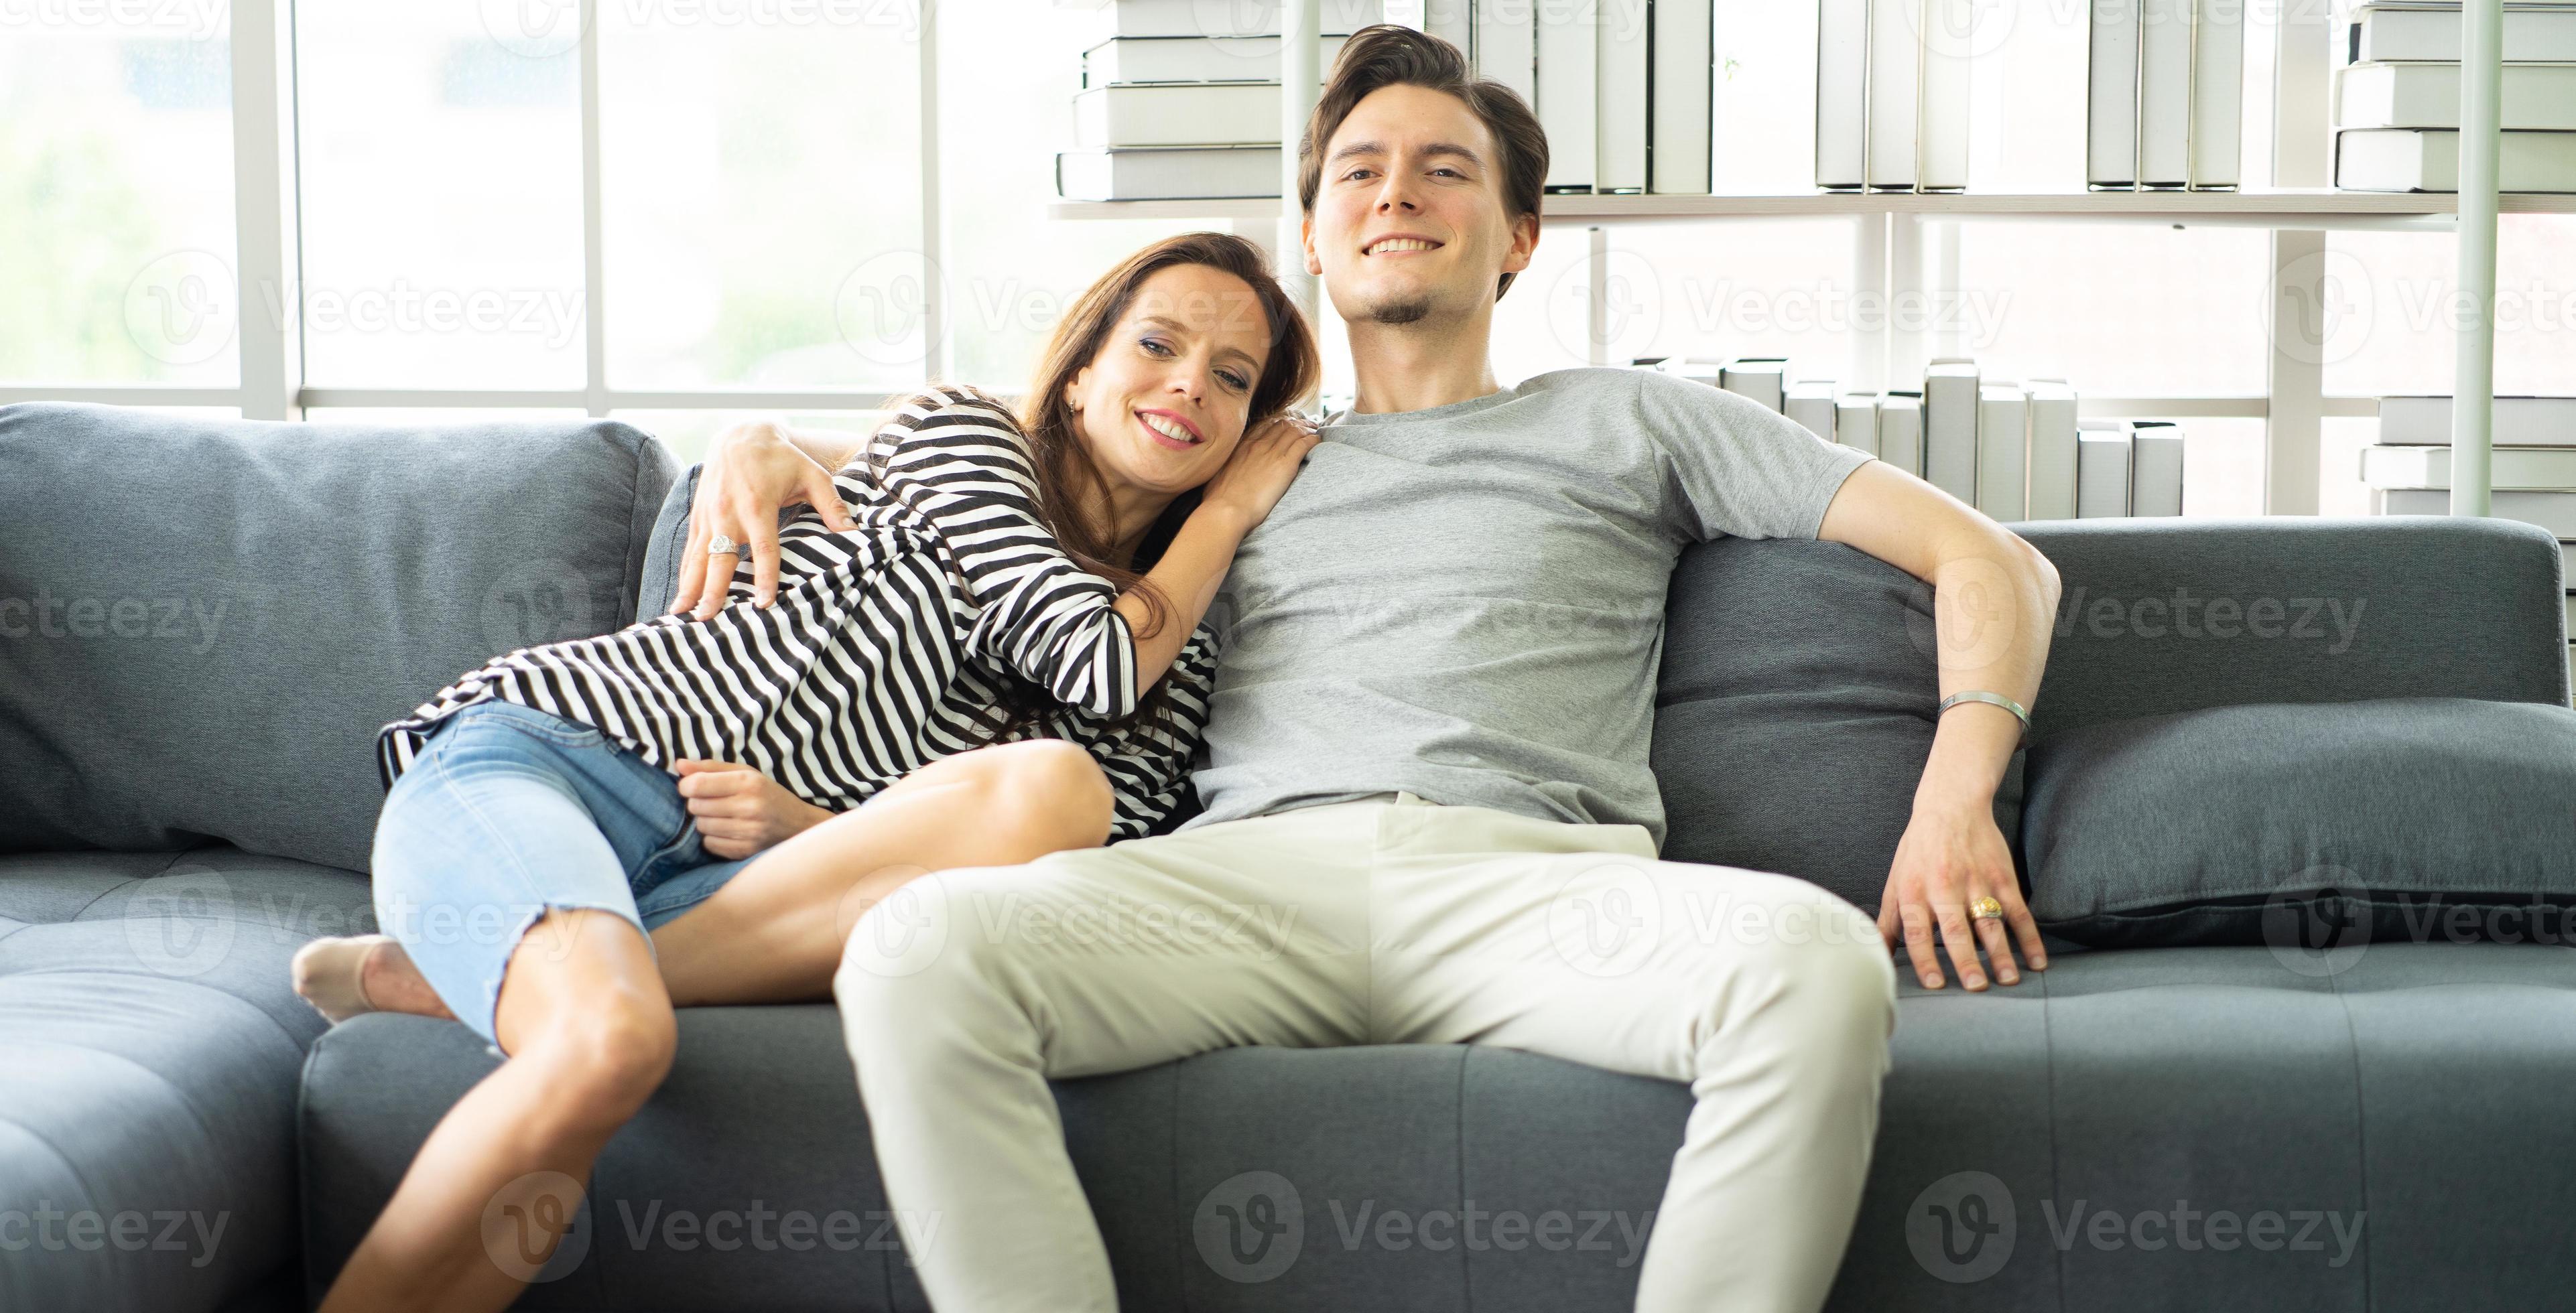 Romantic Affectionate Couple Embracing Sitting On Cozy Couch In Living Room Relaxing At Home